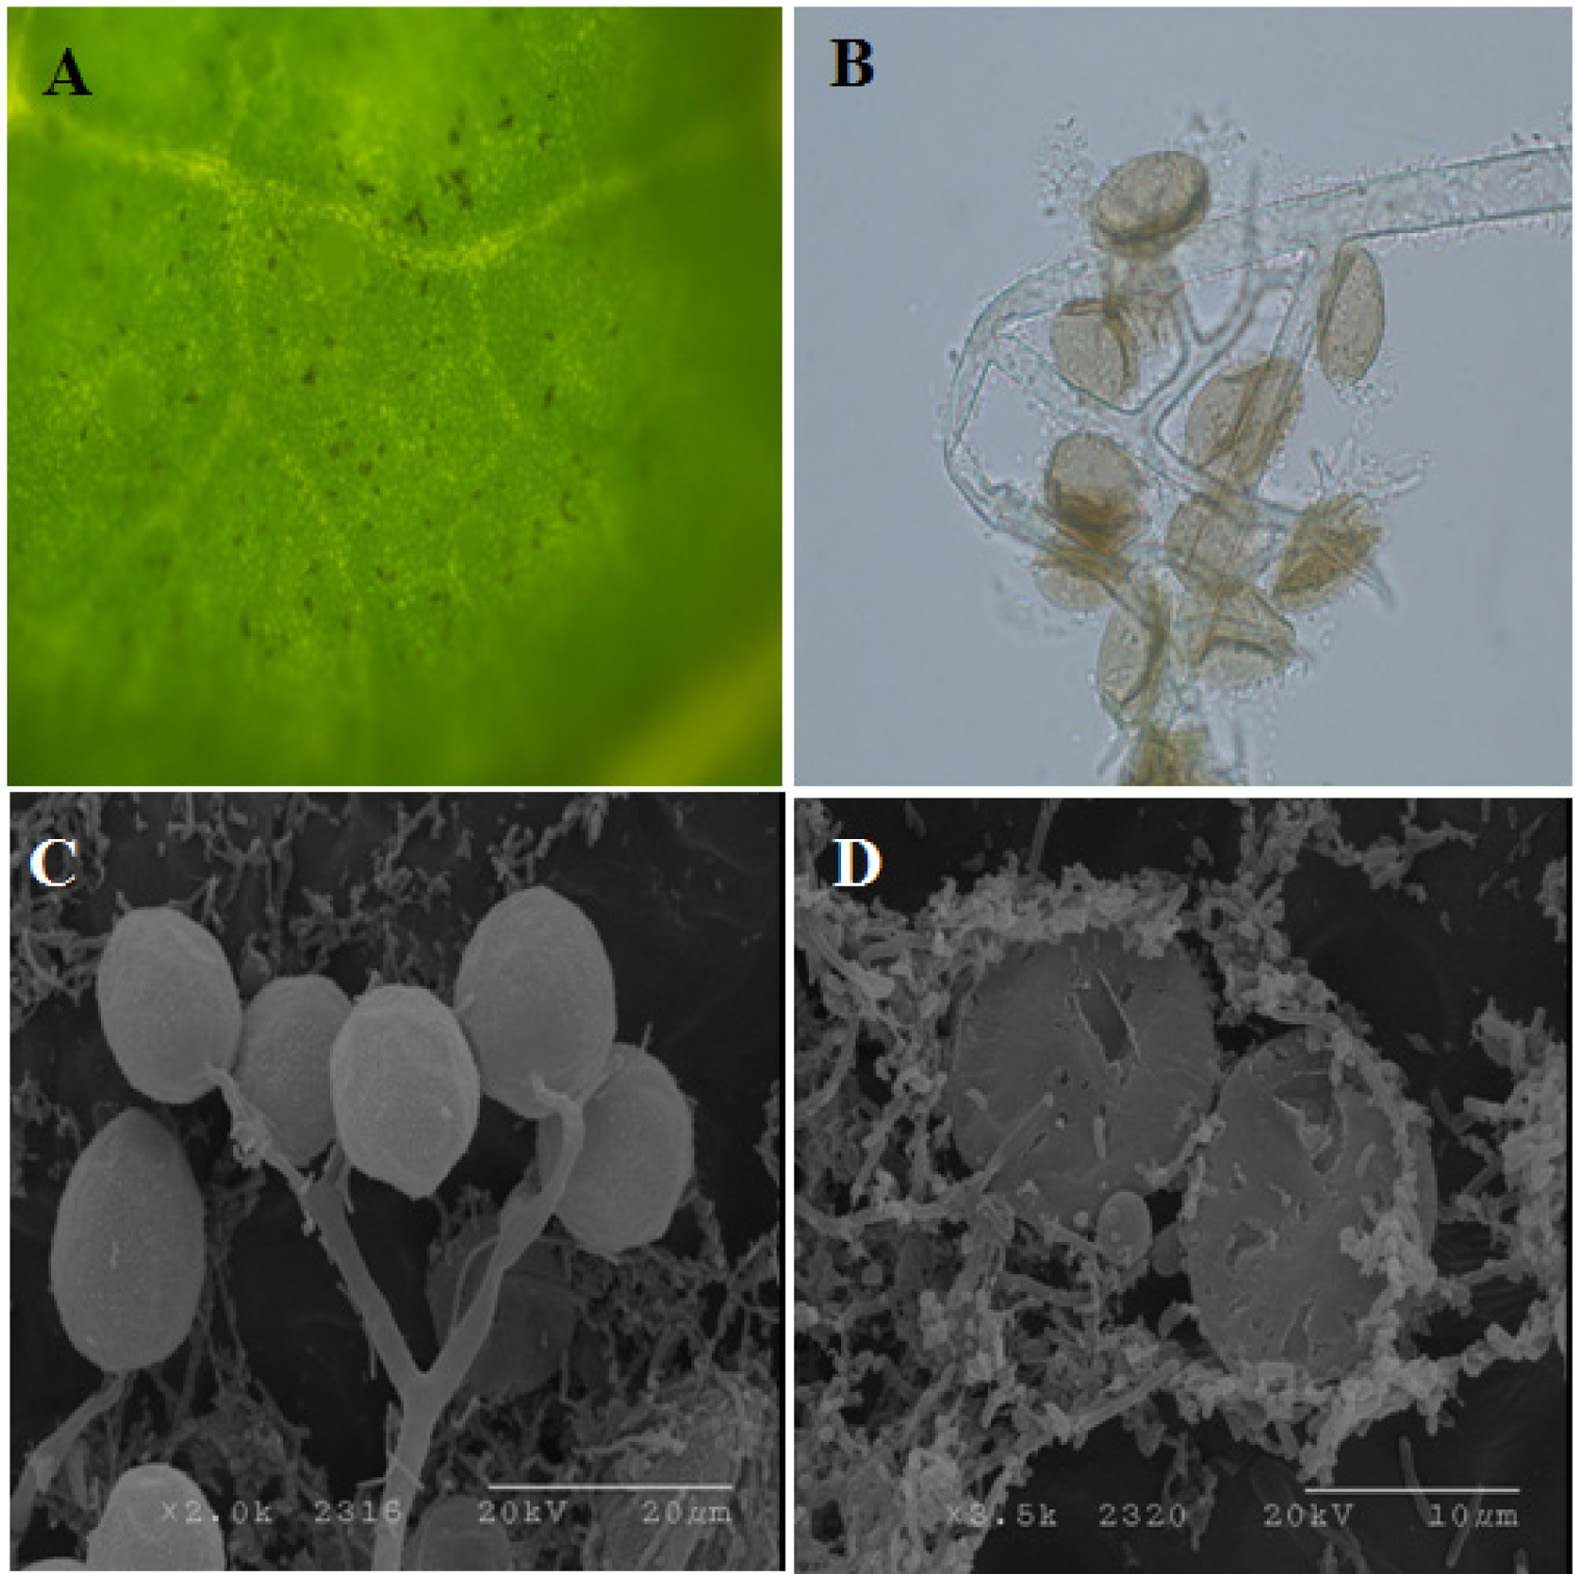 Suppression of downy mildew fungi on cucumber by treated with culture of B. amyloliquefaciens CC110 at 8 days after inoculation of P. cubensis at 20℃.